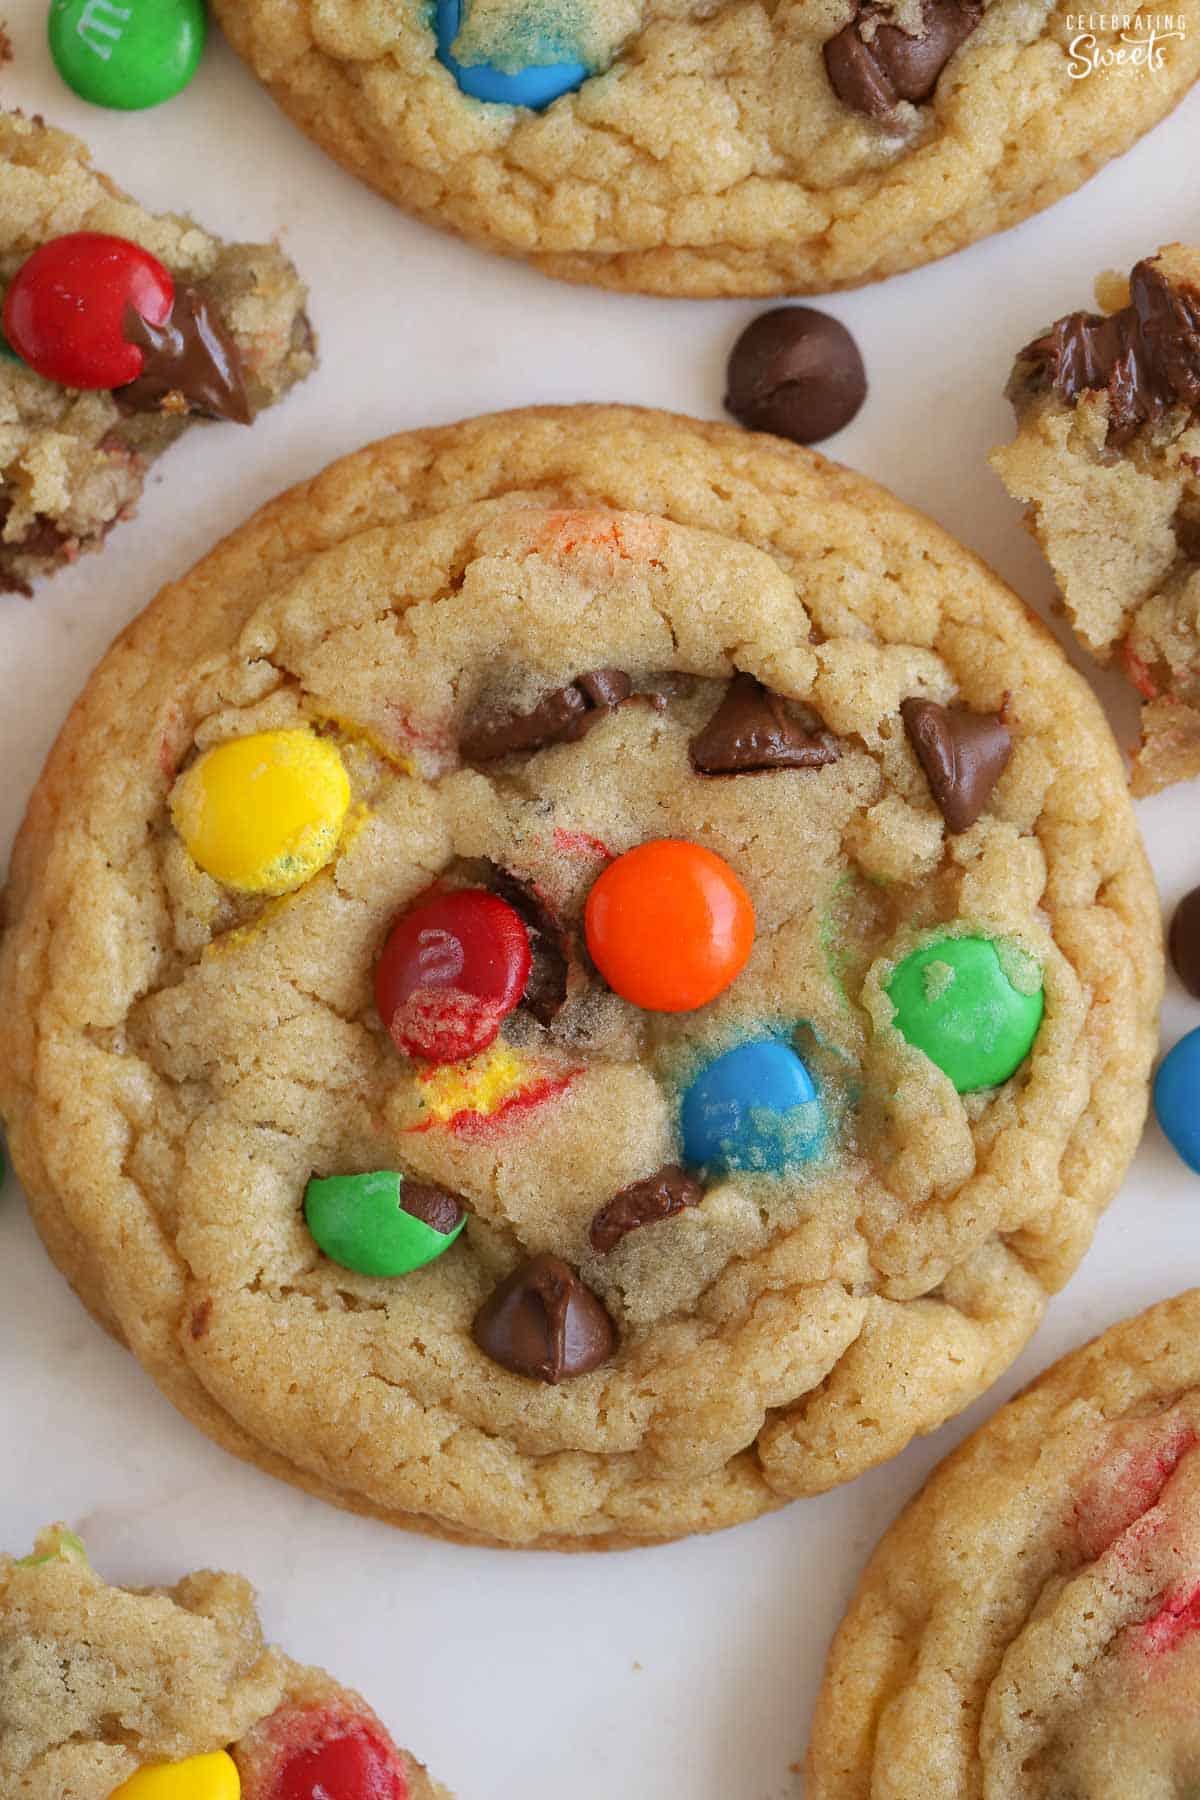 Closeup of an M&M cookie topped with chocolate chips and M&M's.